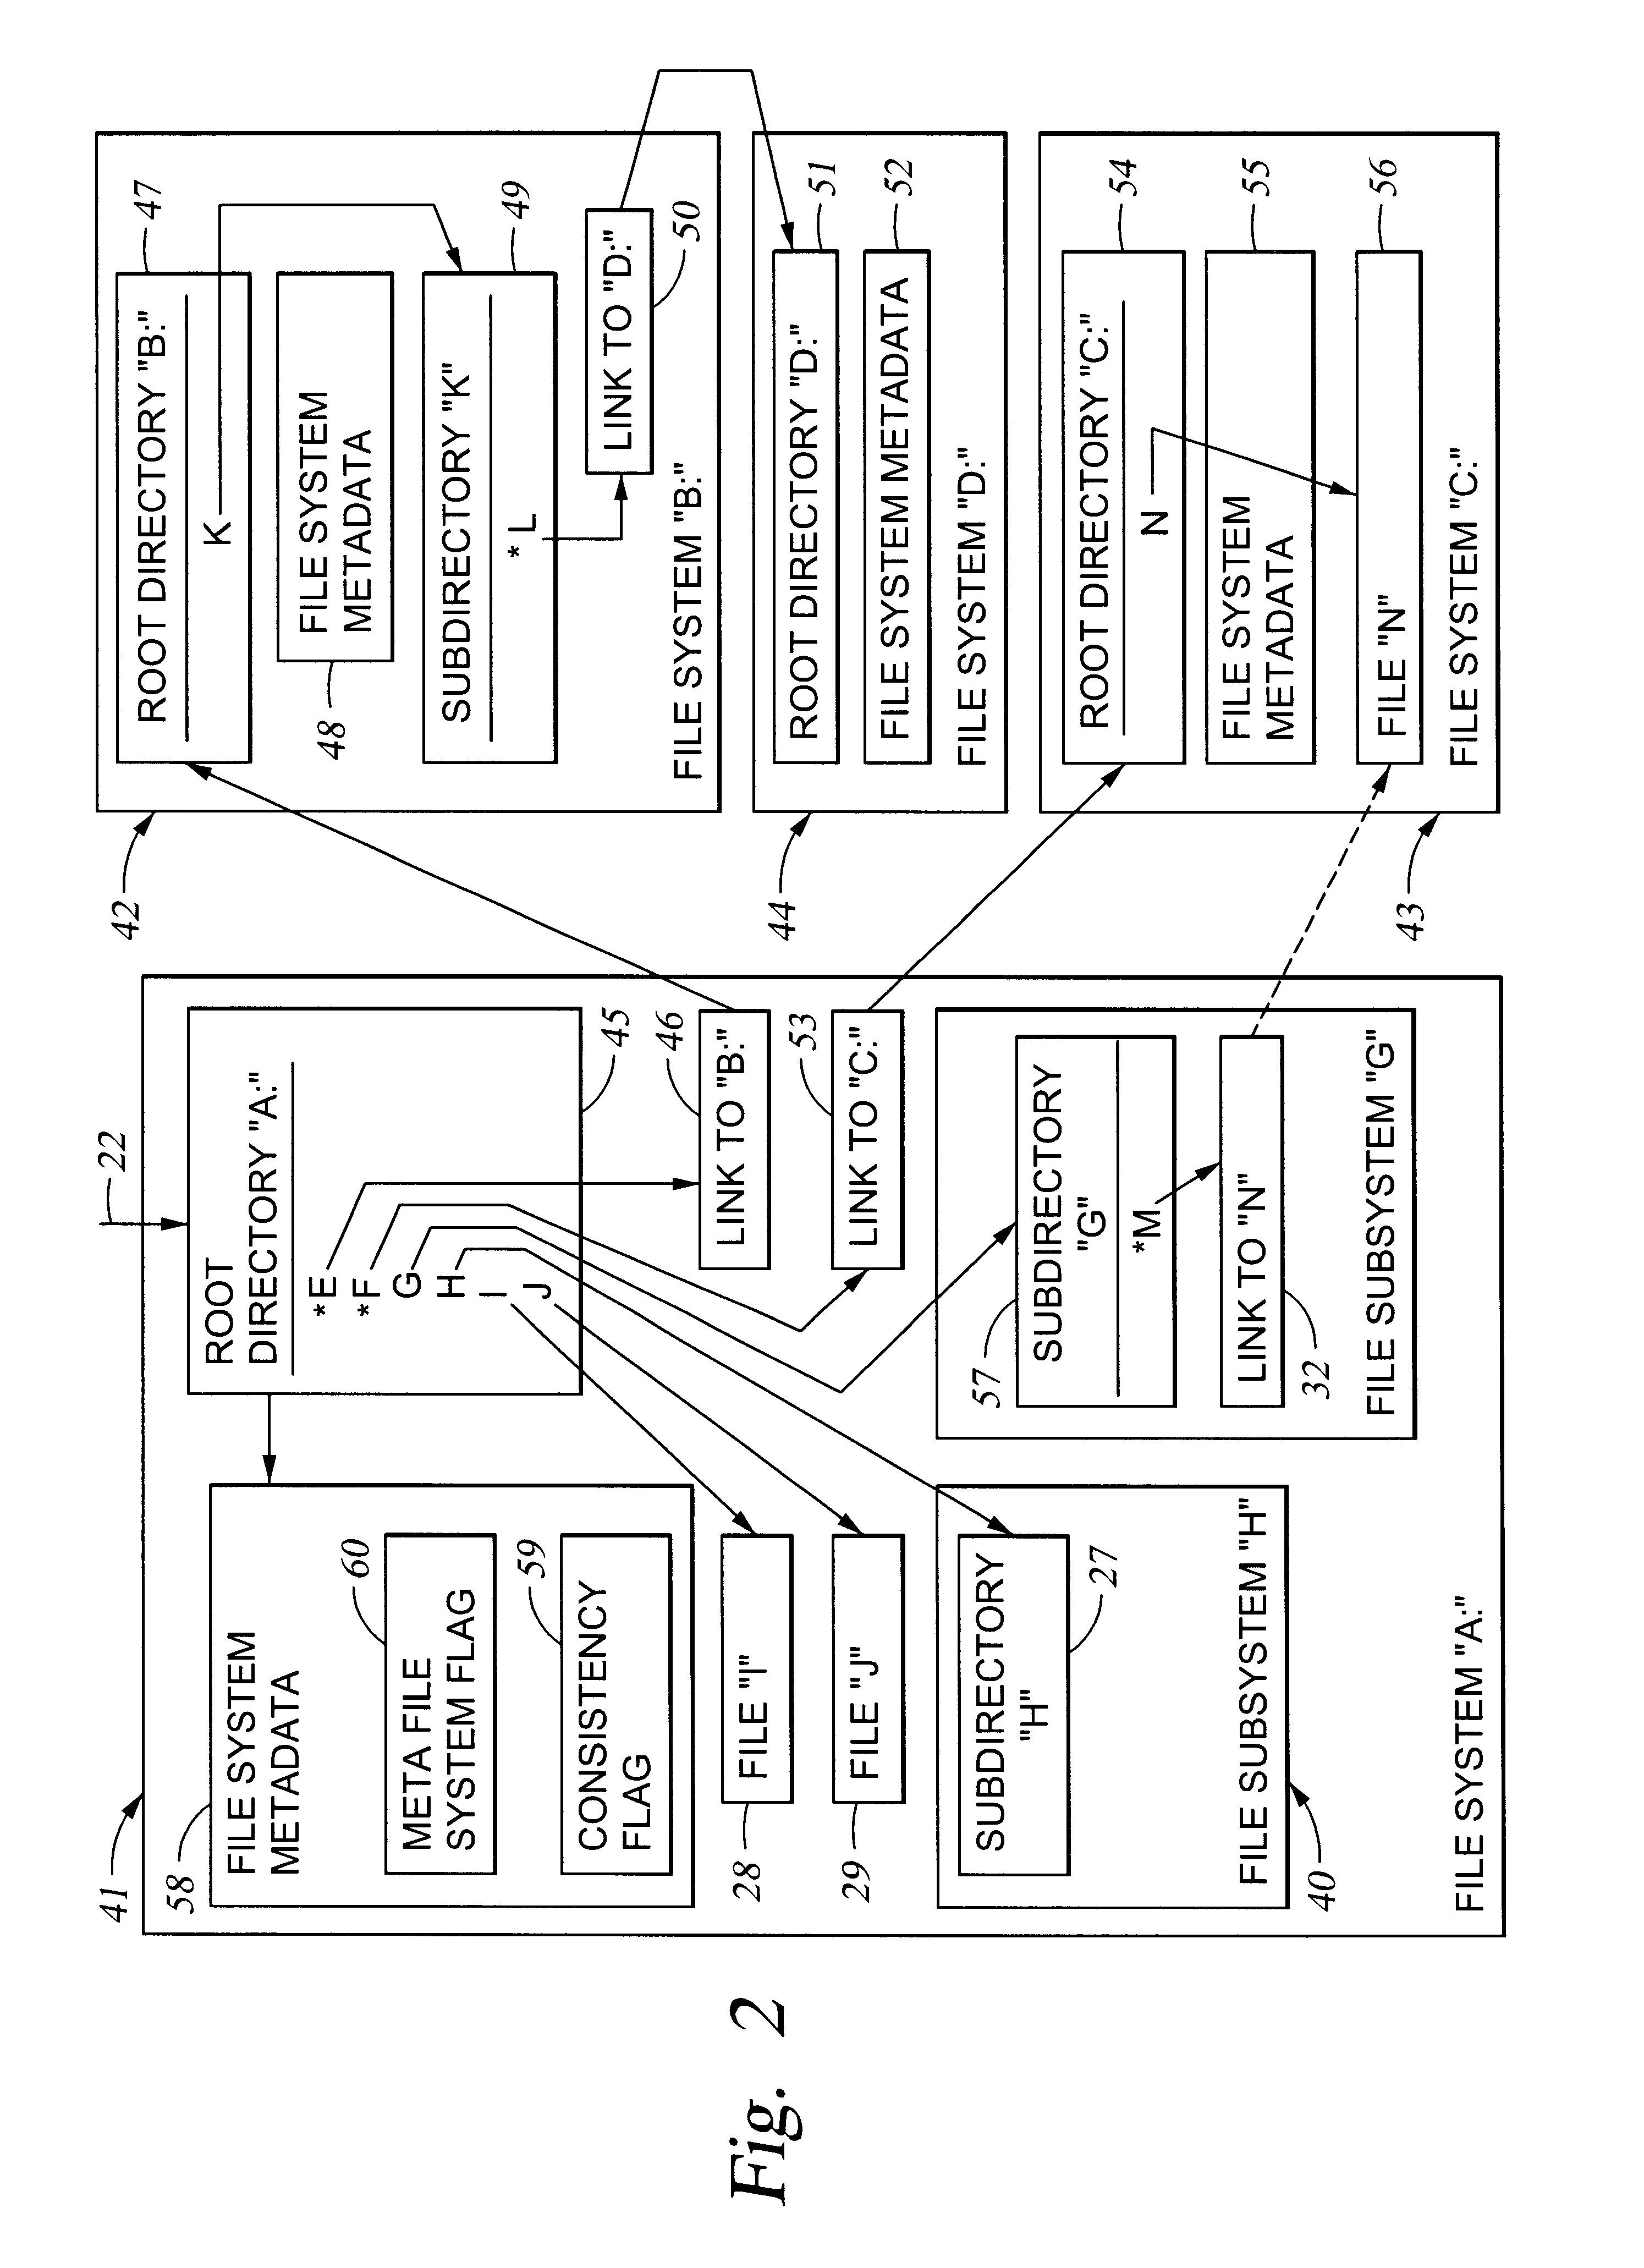 Building a meta file system from file system cells